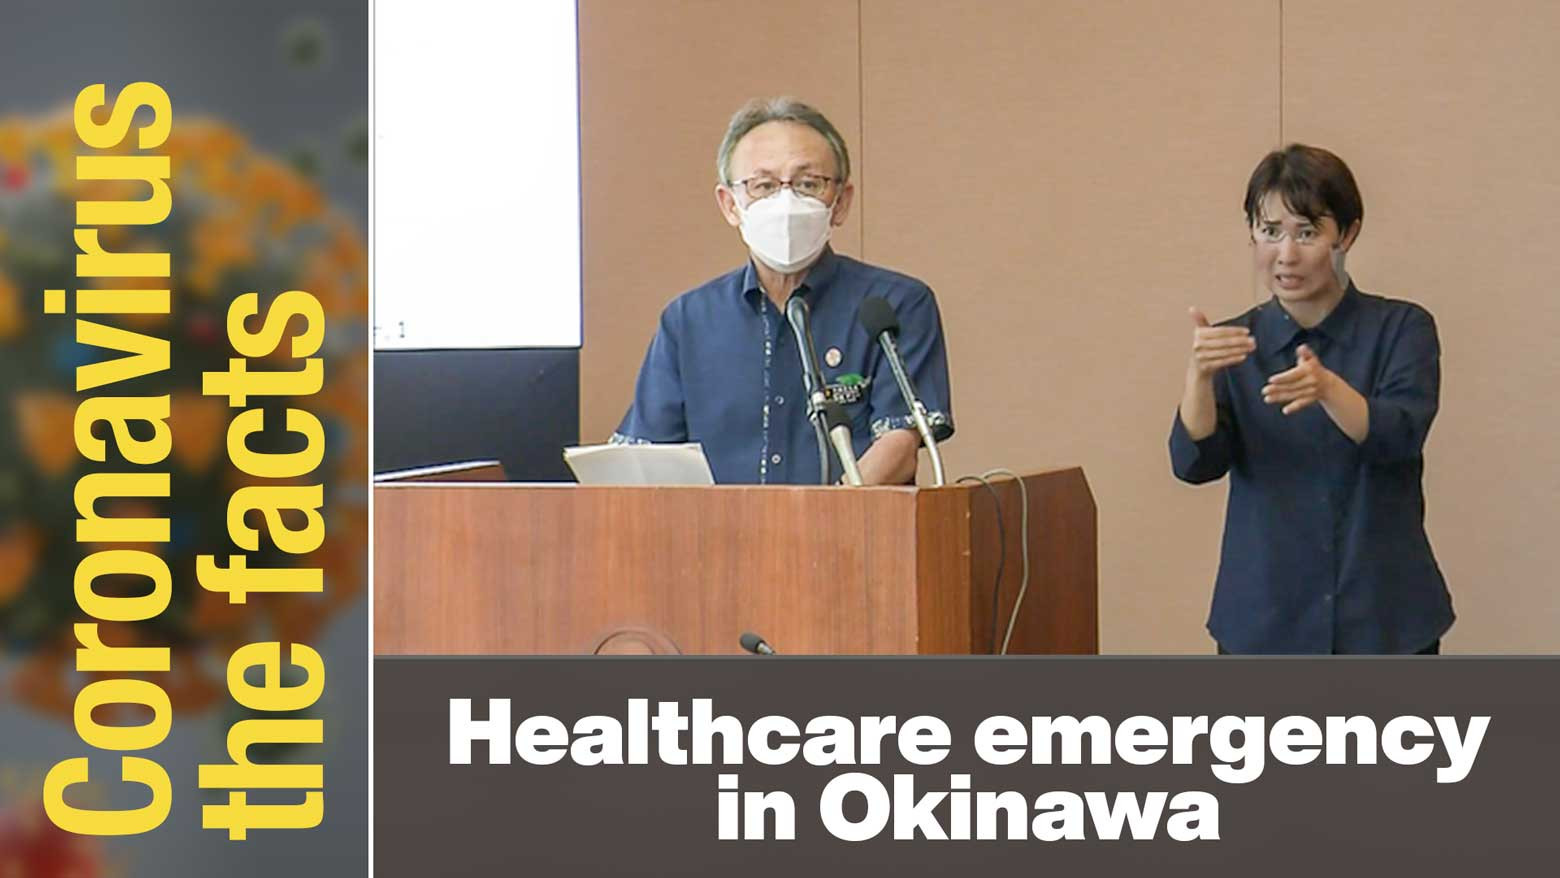 Record COVID cases in Okinawa cause medical emergency